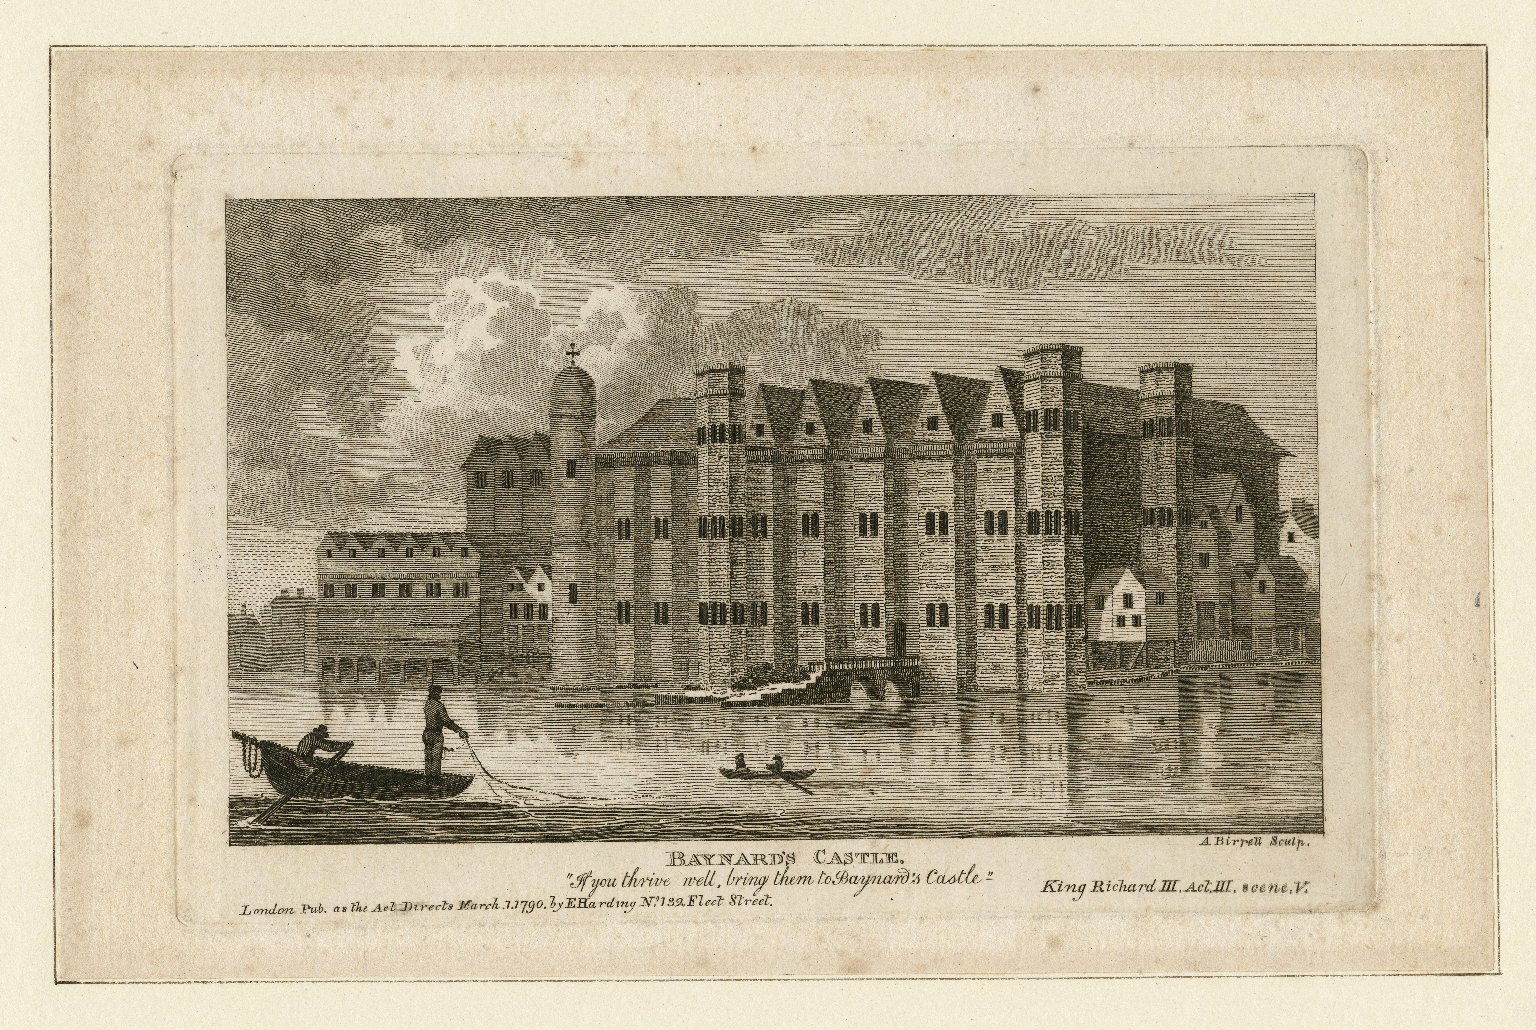 Engraving of Baynard’s Castle by A. Birrell. Image courtesy of the Folger Digital Image Collection.